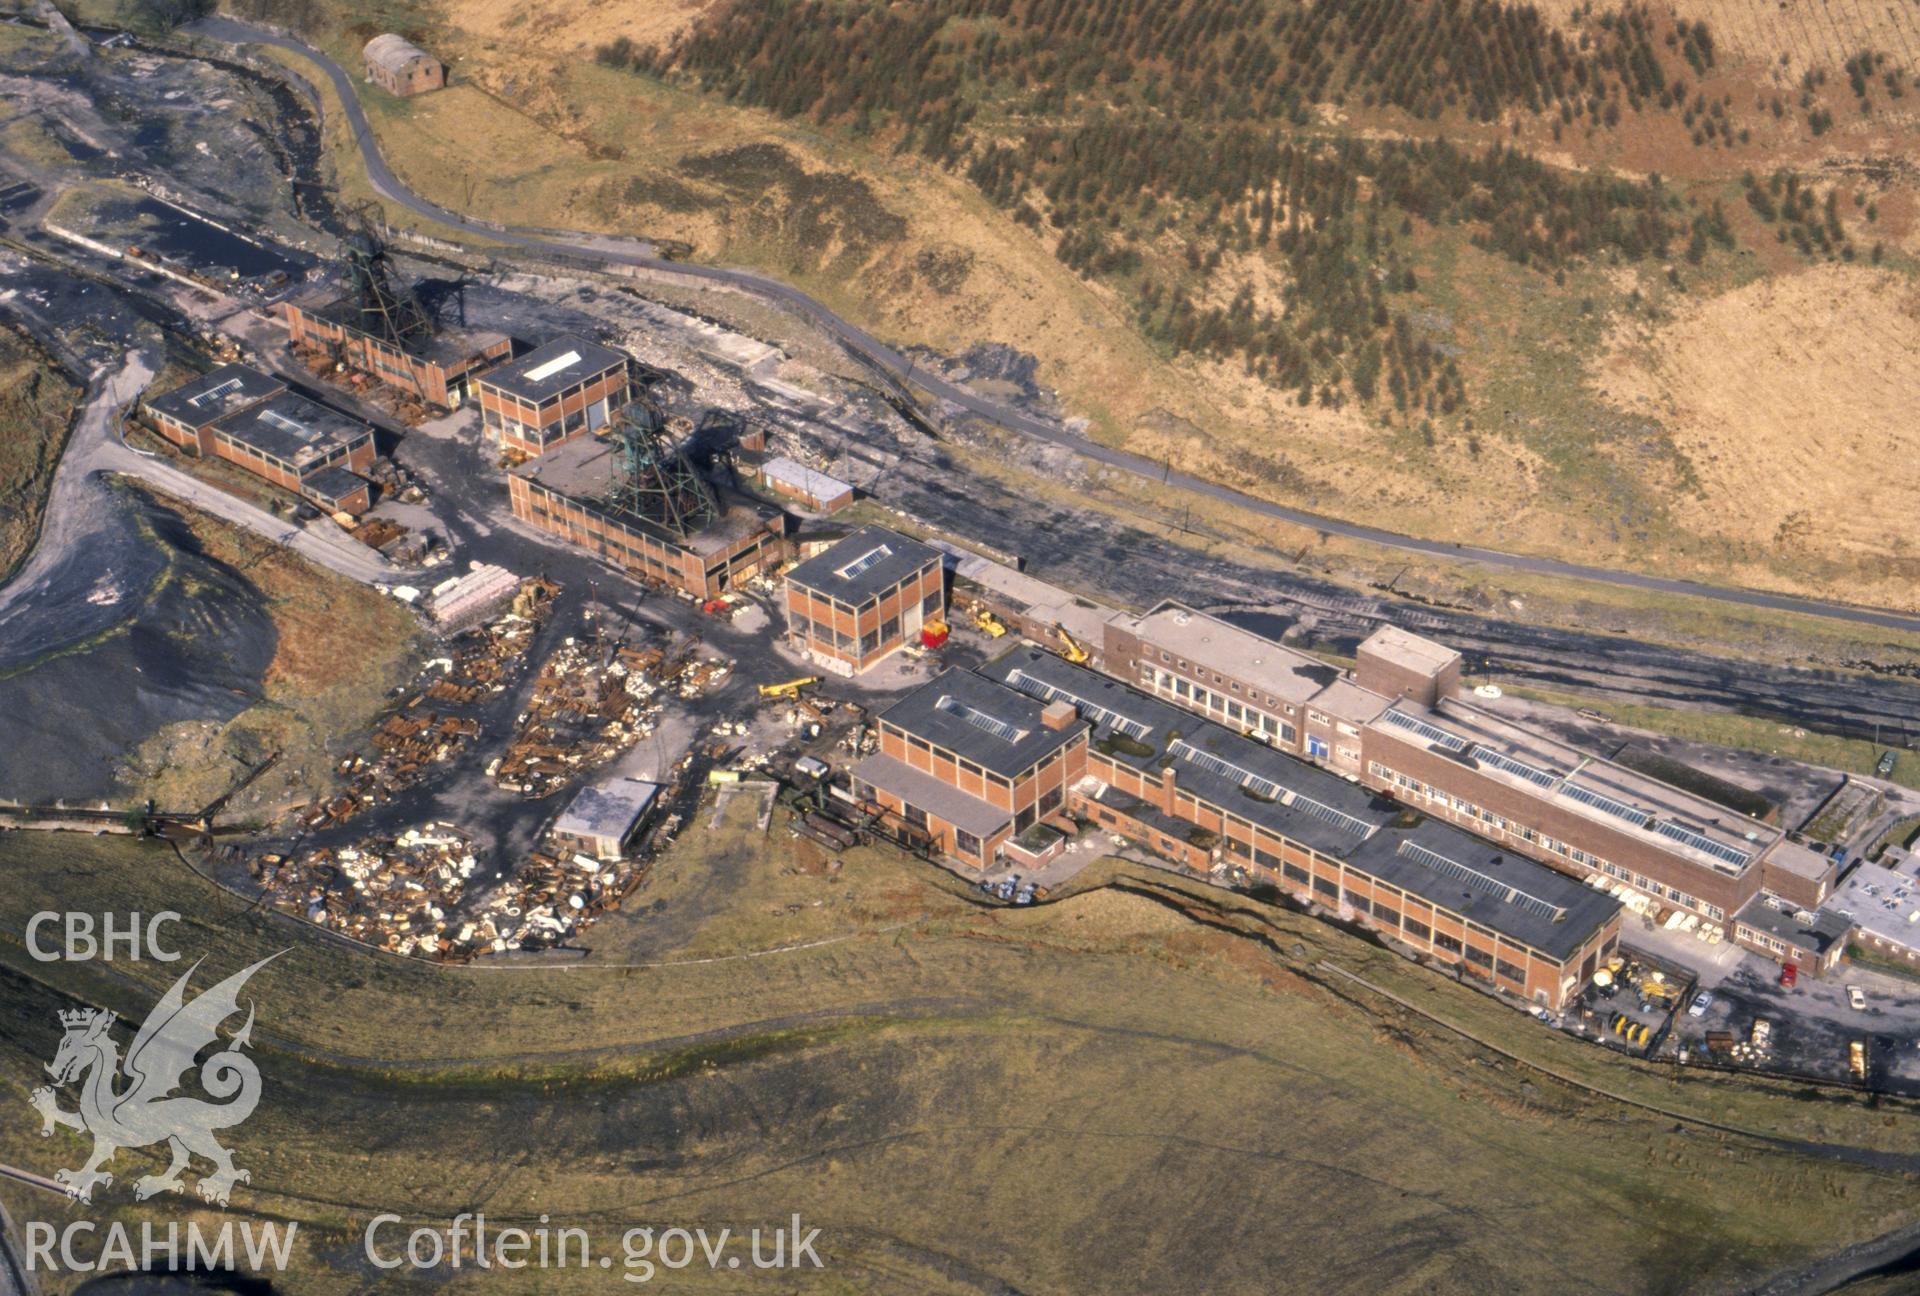 Slide of RCAHMW colour oblique aerial photograph of Maerdy Colliery, taken by C.R. Musson, 26/3/1990.